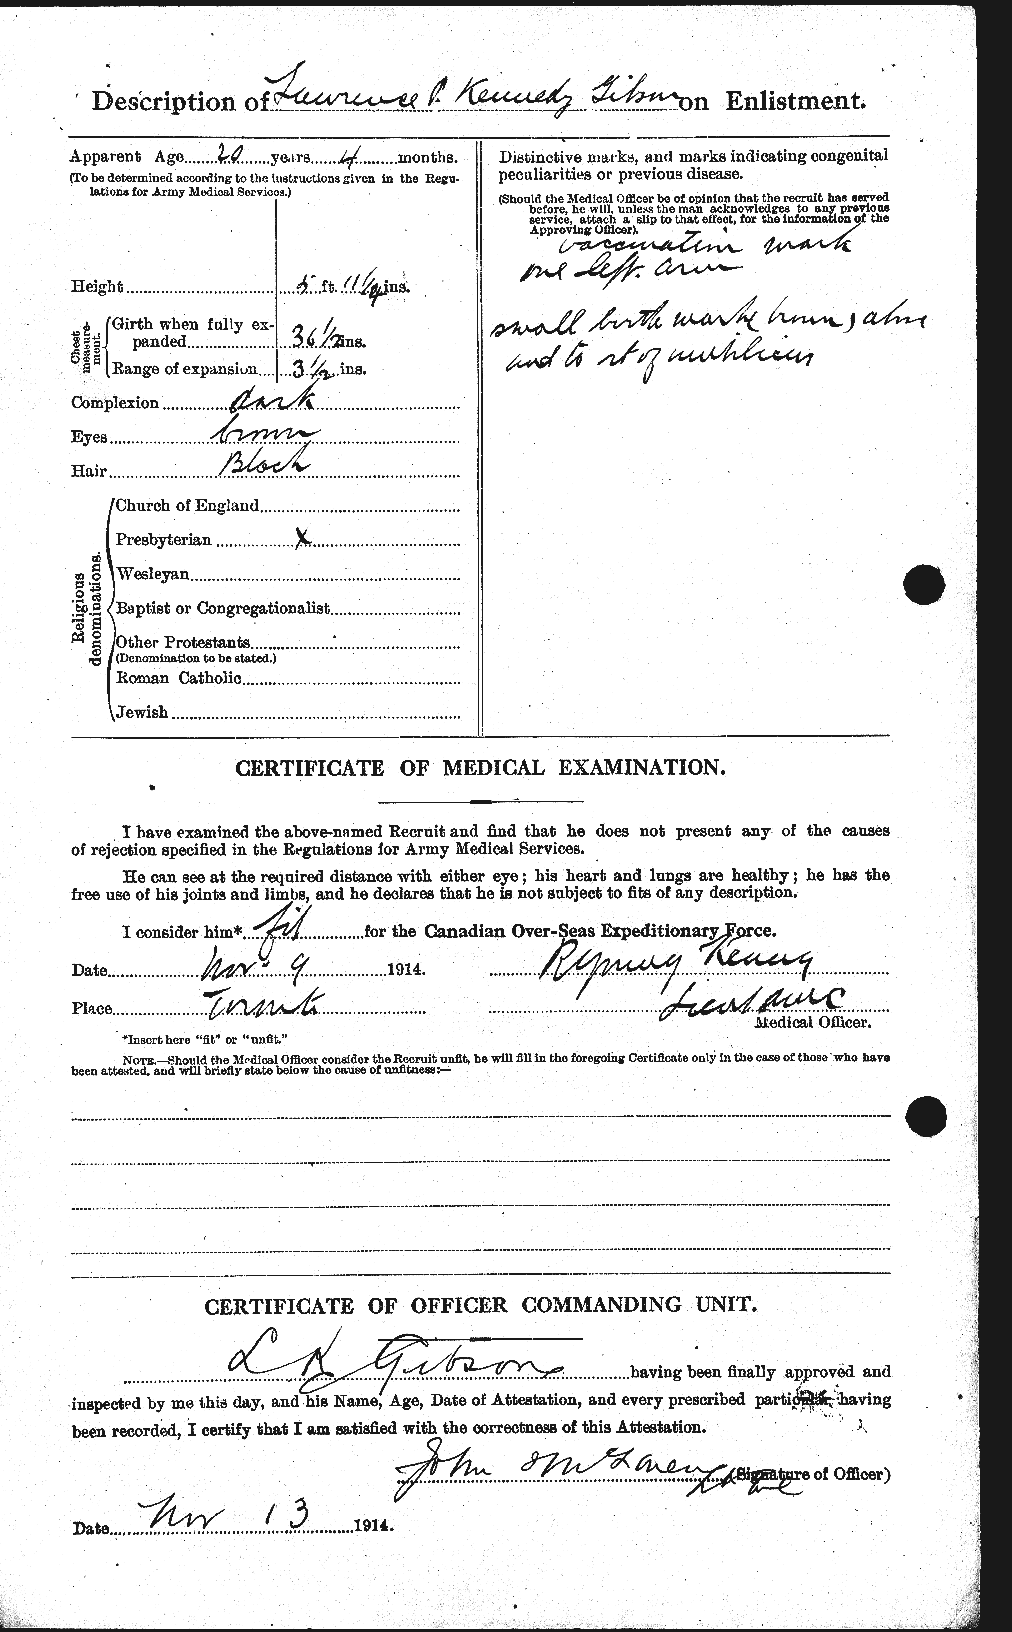 Personnel Records of the First World War - CEF 350579b